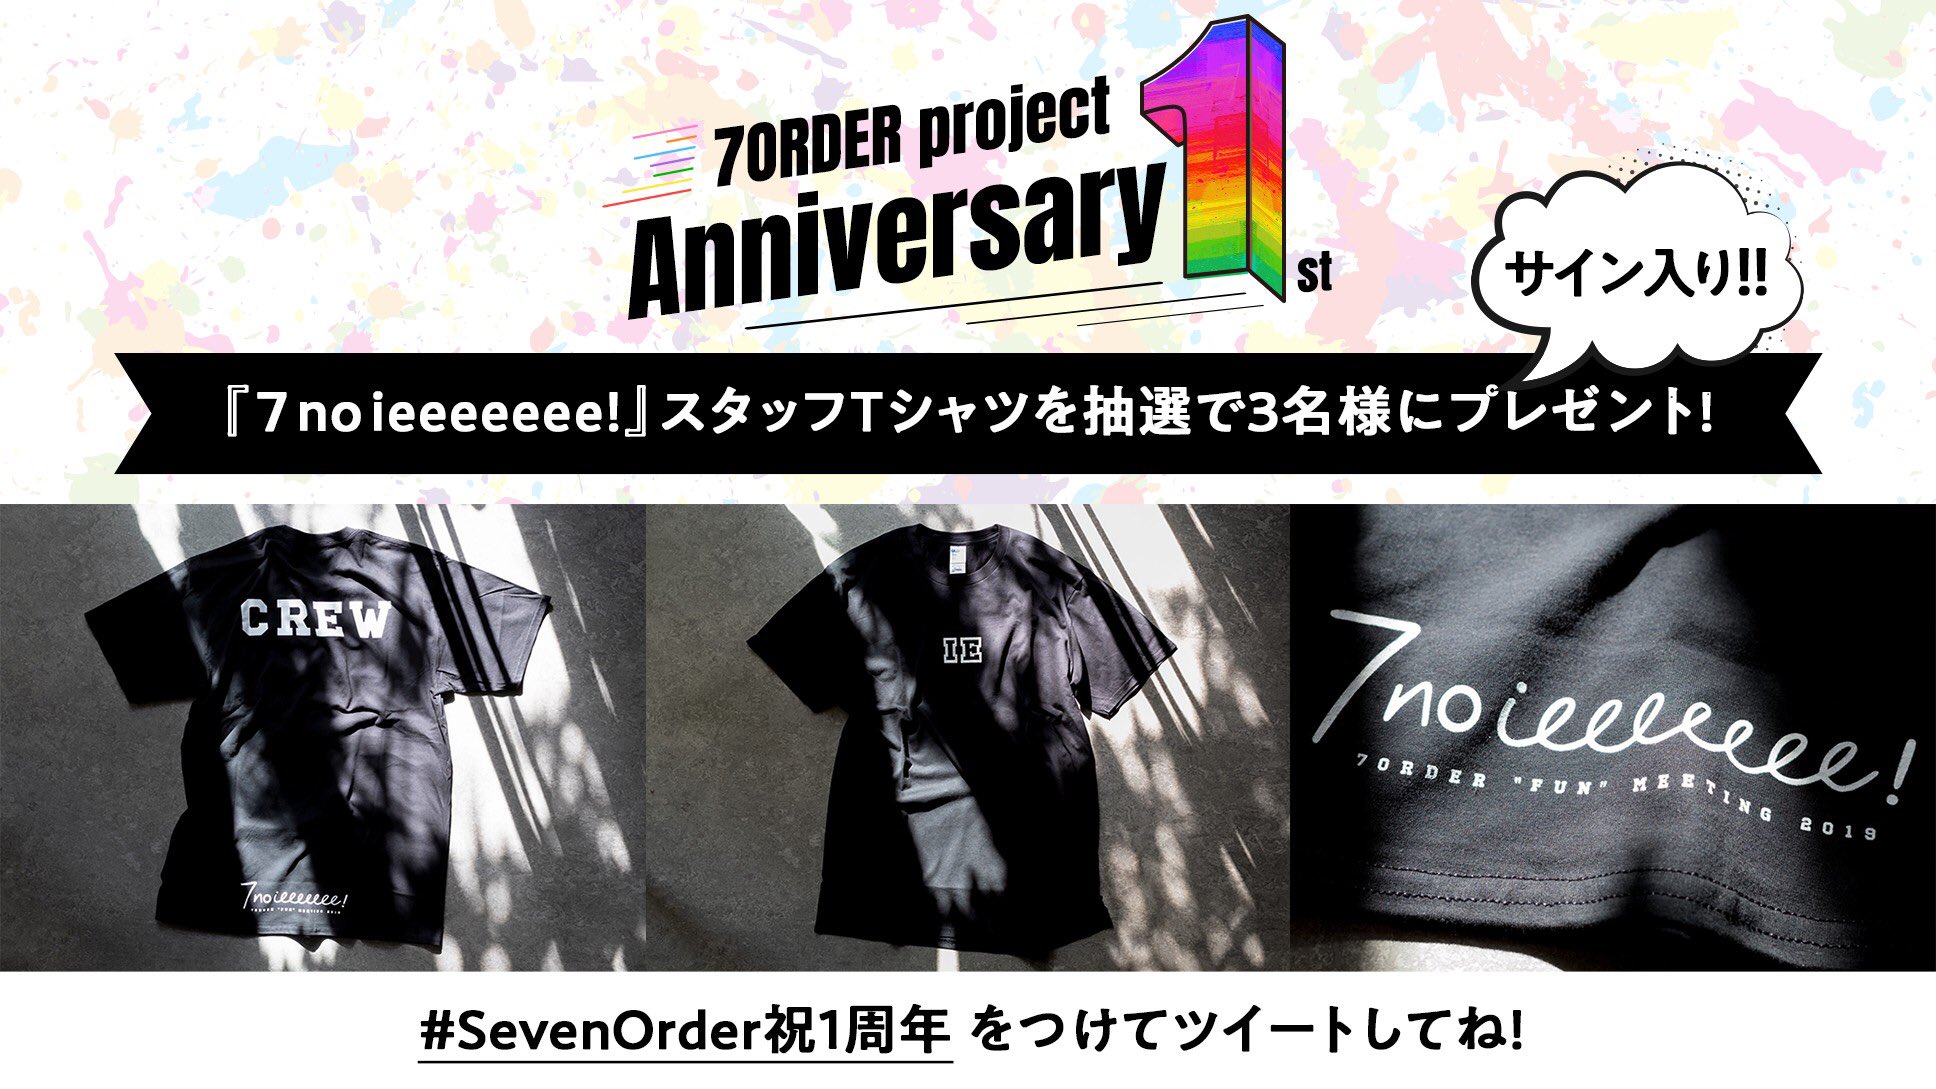 7ORDER project on Twitter: 